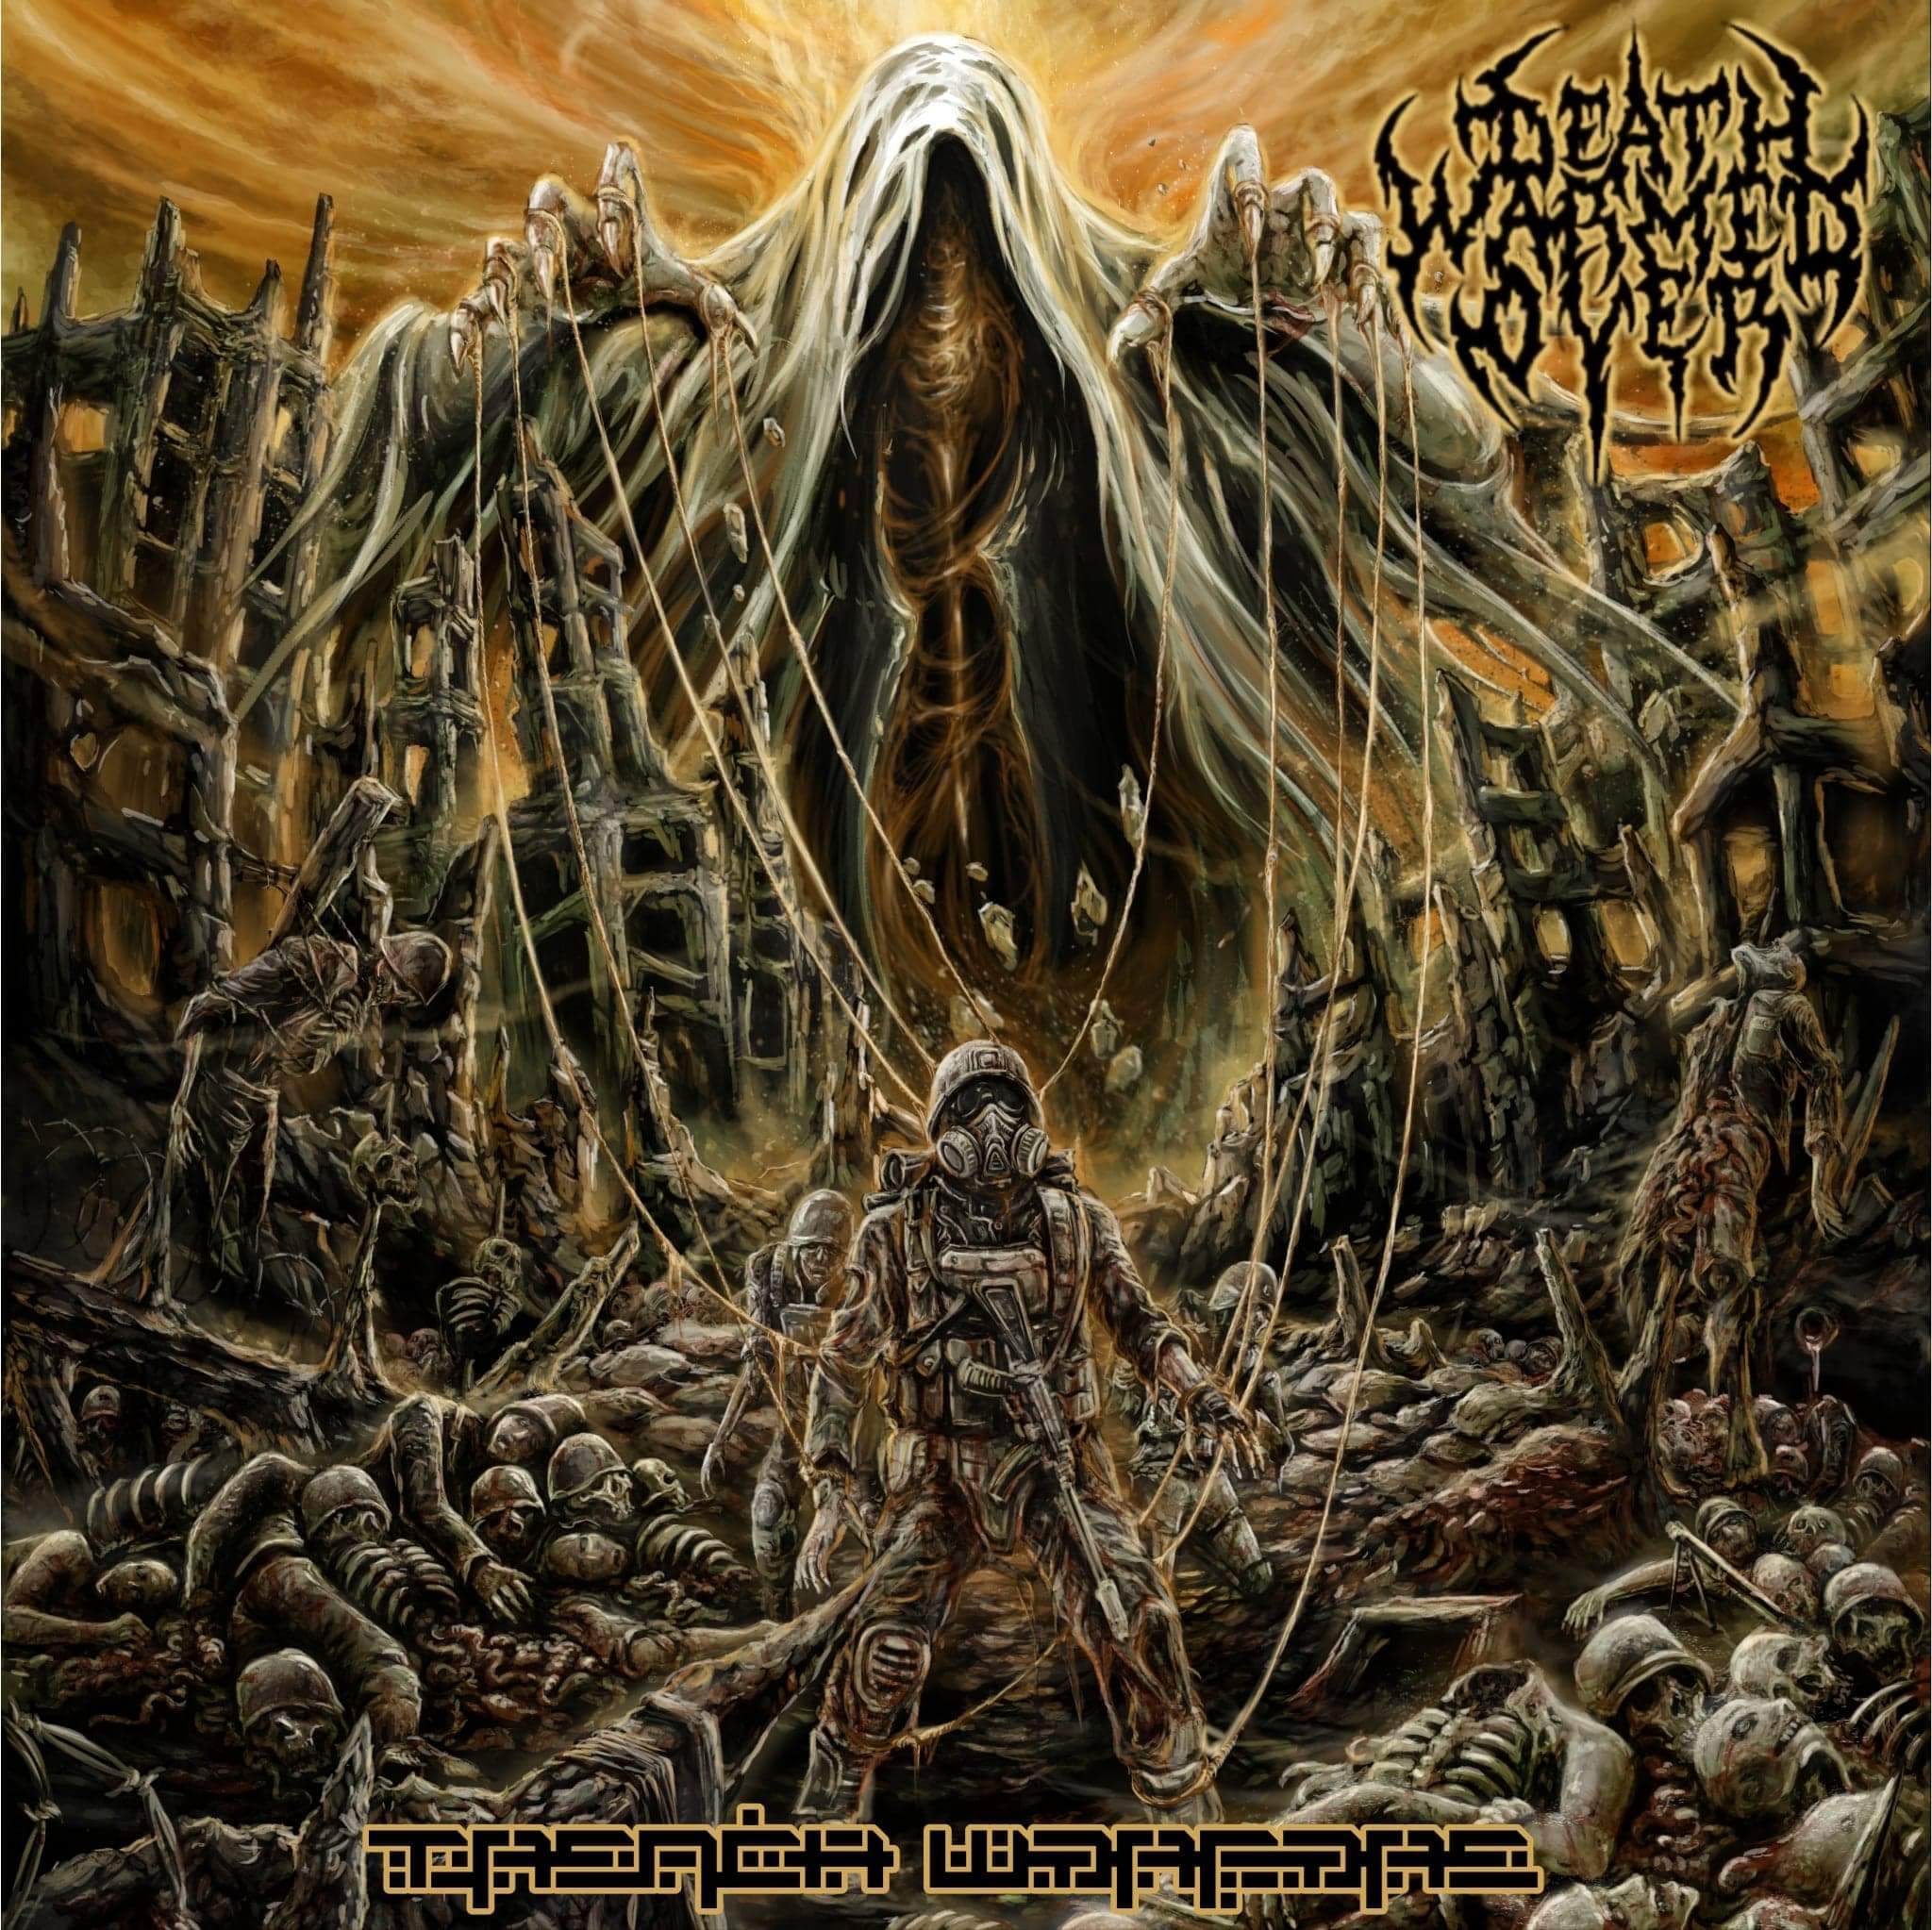 Warm over. Trench Warfare. Logo Death Metal 2023. DCLXVI: to Ride shoot straight and speak the Truth entombed.